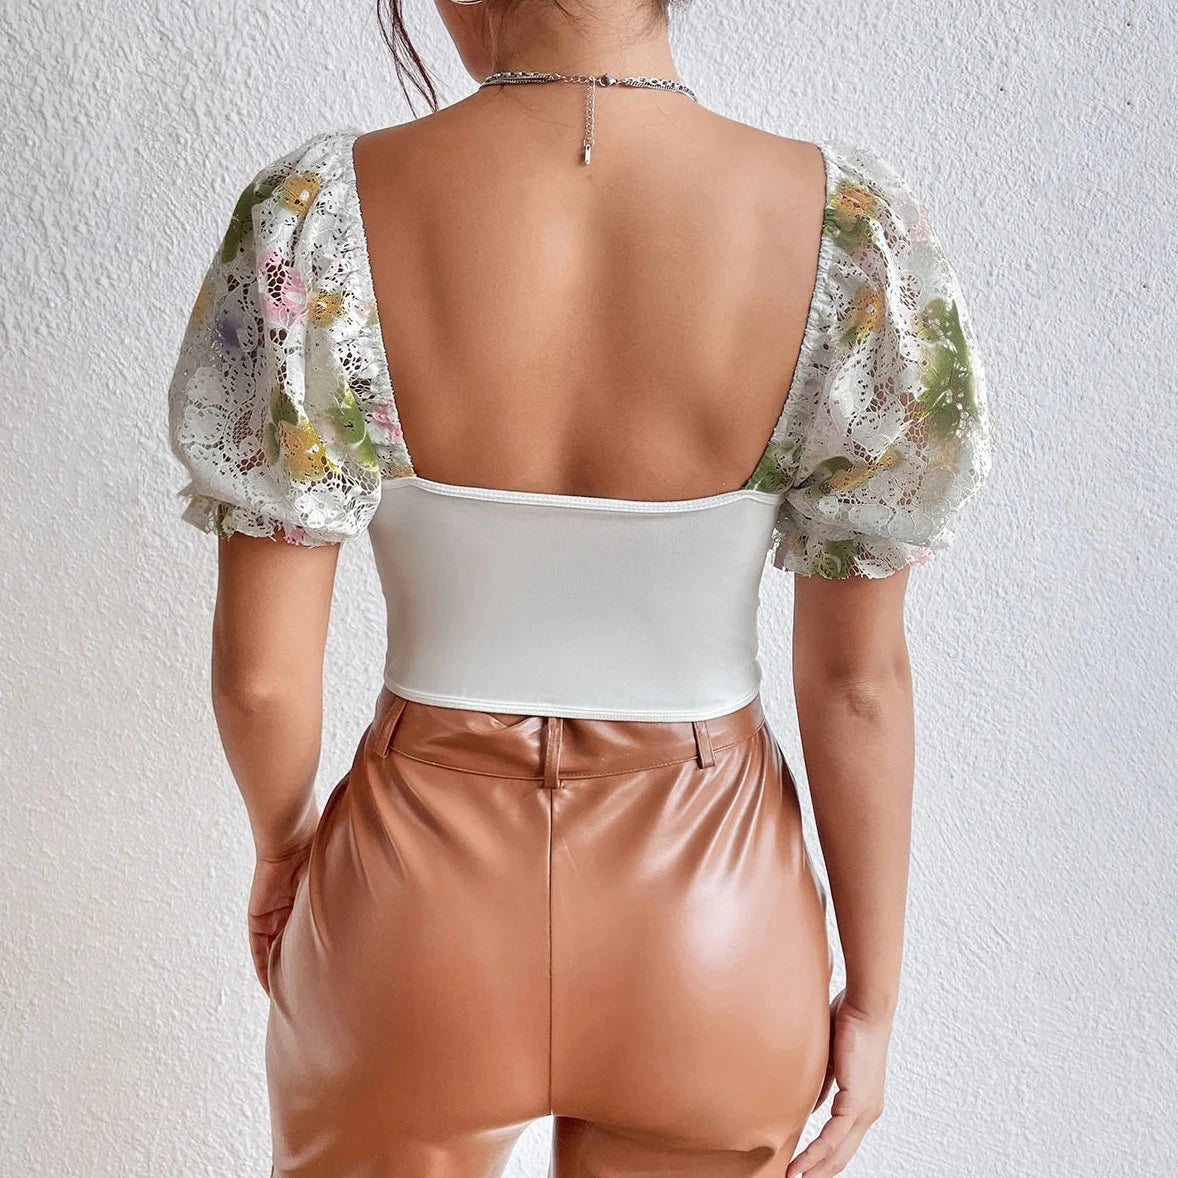 Lace Floral Embroidery Crop Top - Verostyle